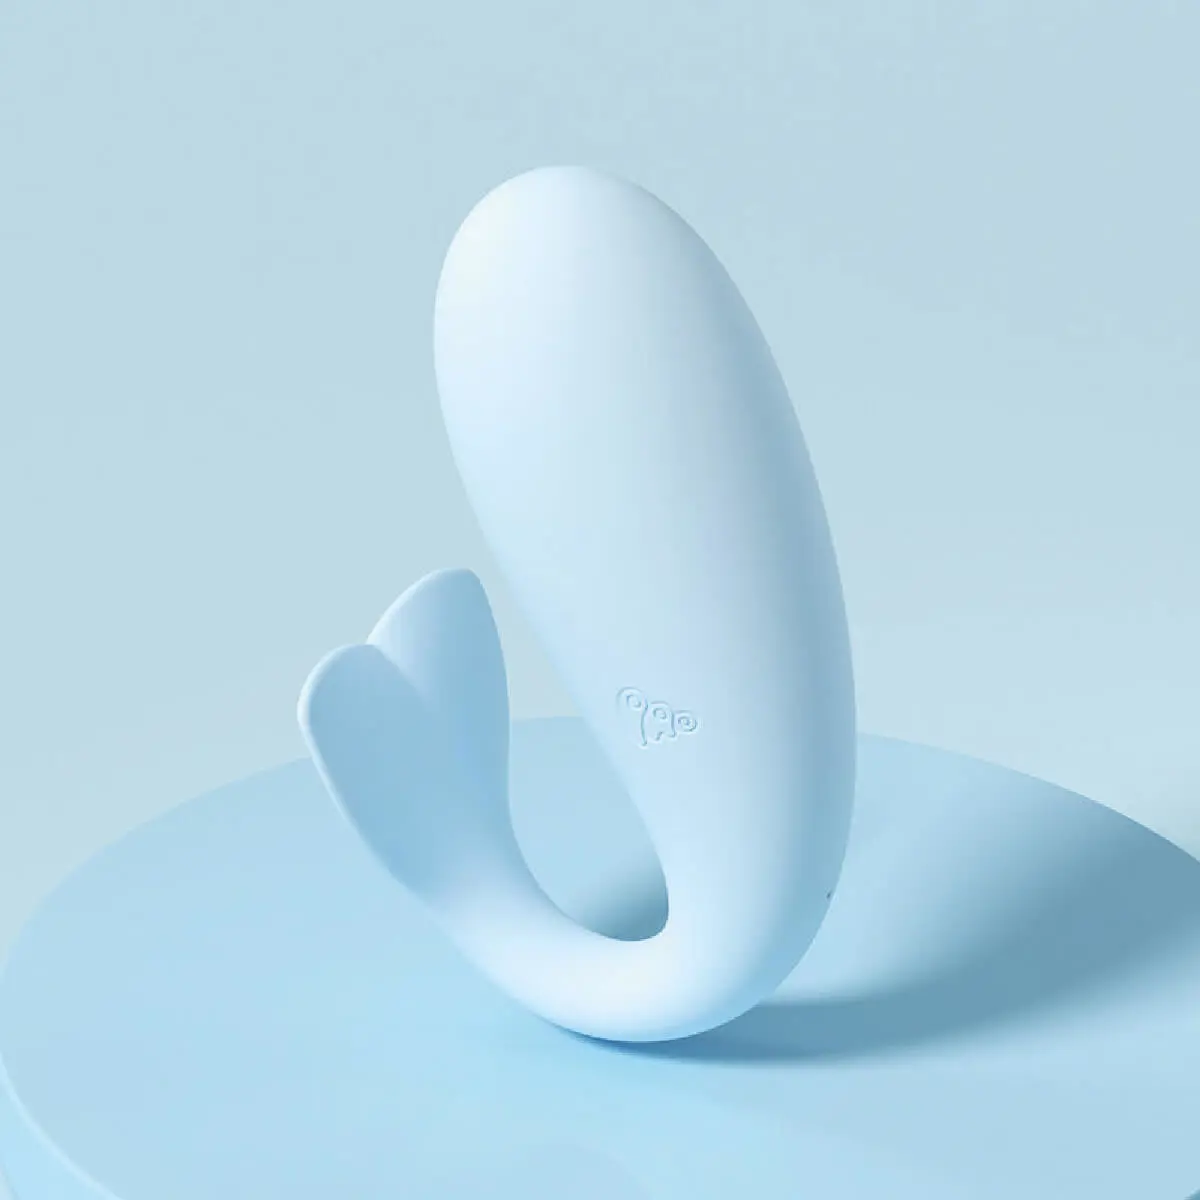 Image of the Doctor Whale clitoris vibrator.